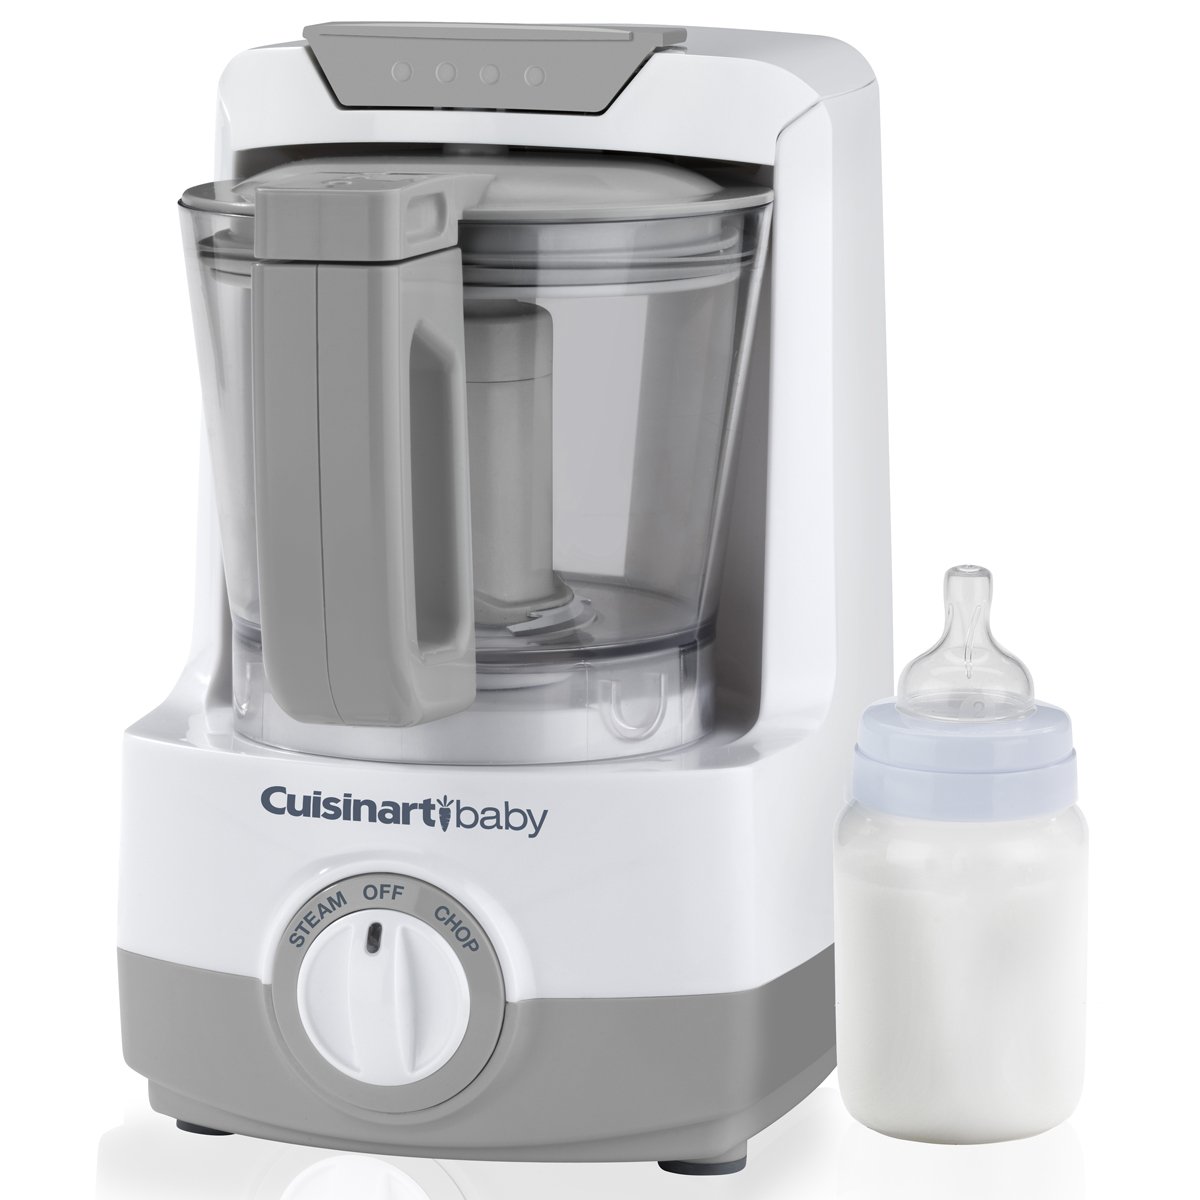 8 Best Food Processors for Baby Food 2022 - Buying Guide 3